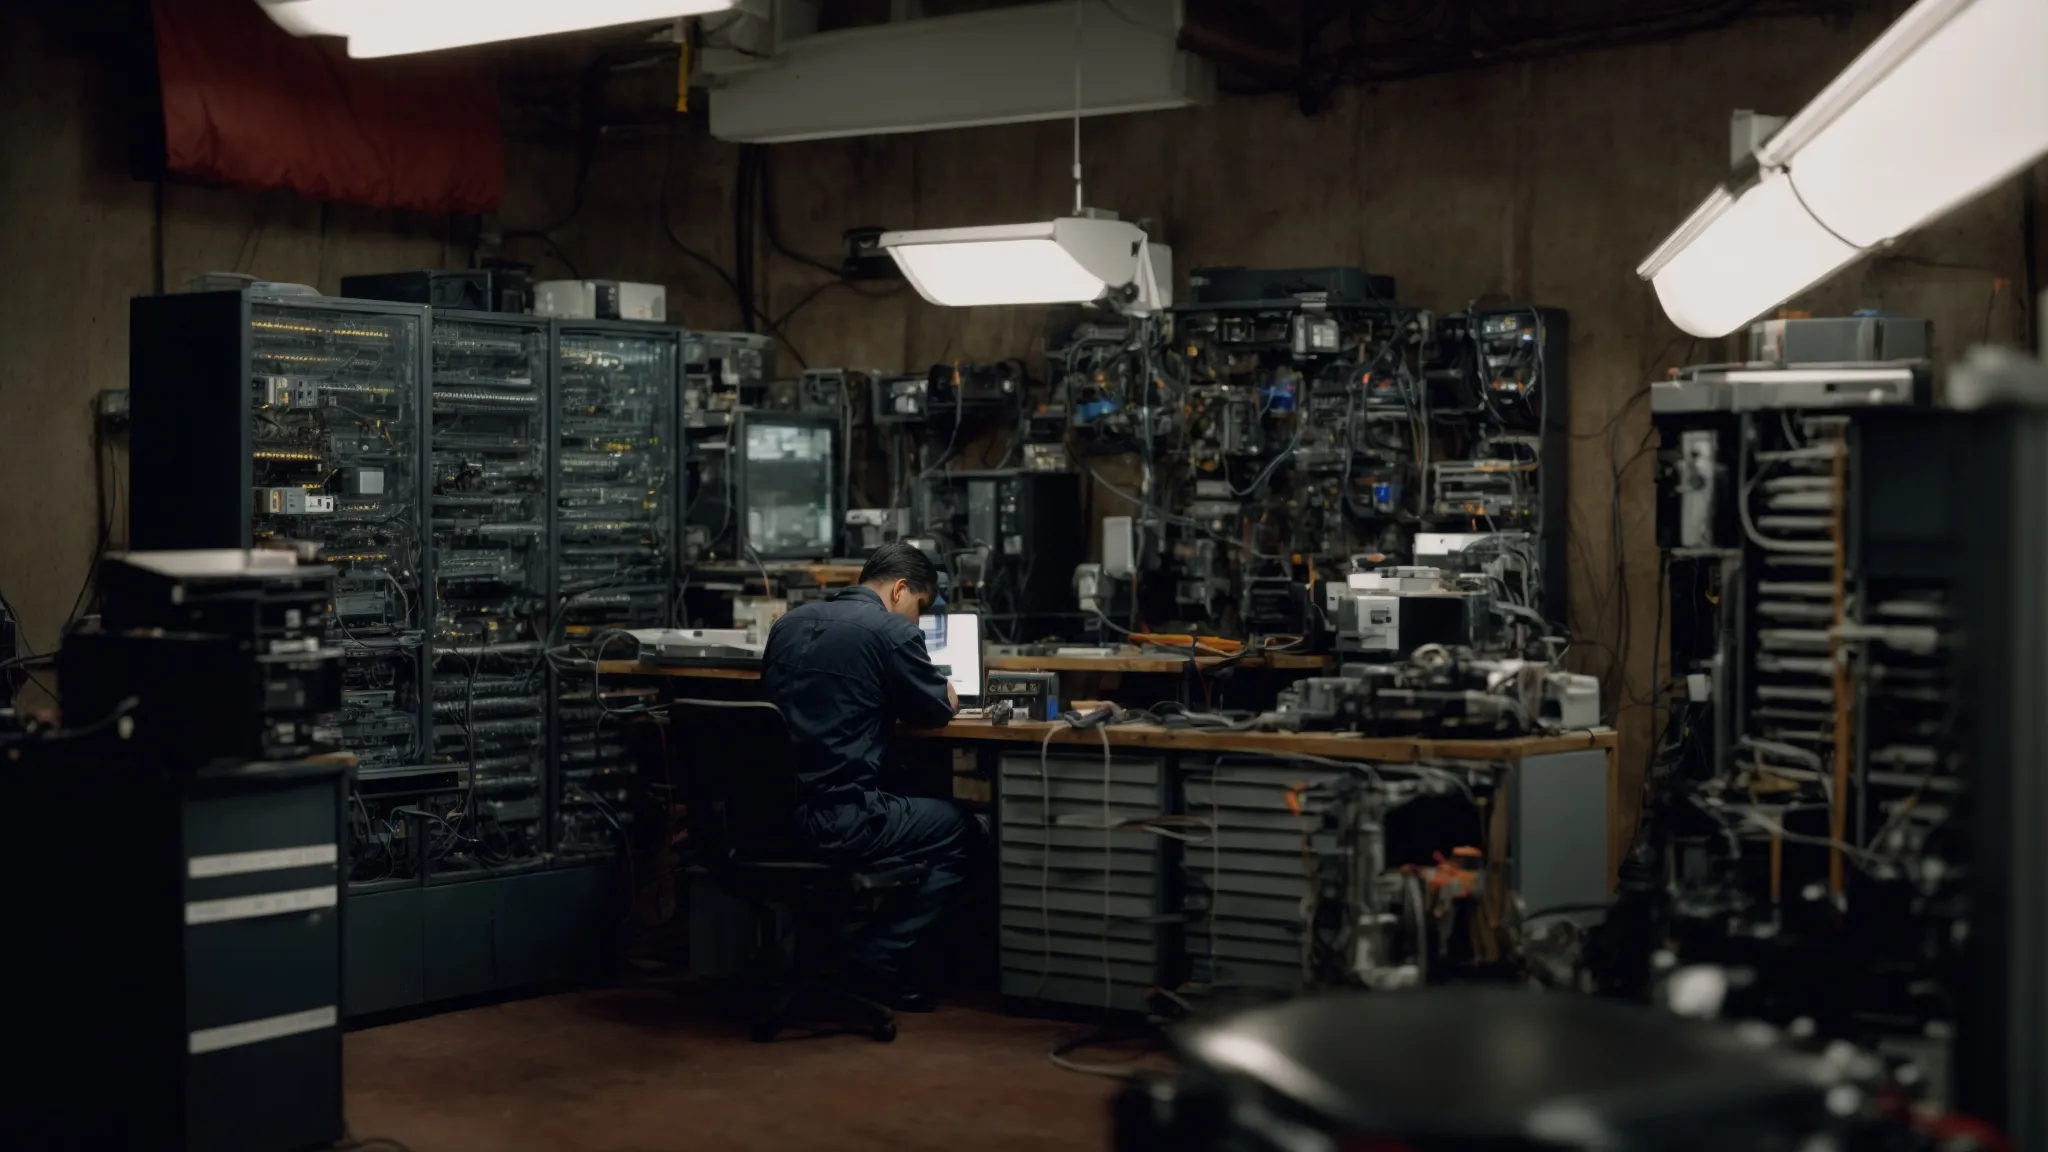 a technician works diligently in an organized, clean repair shop surrounded by diverse computer components and diagnostic equipment.